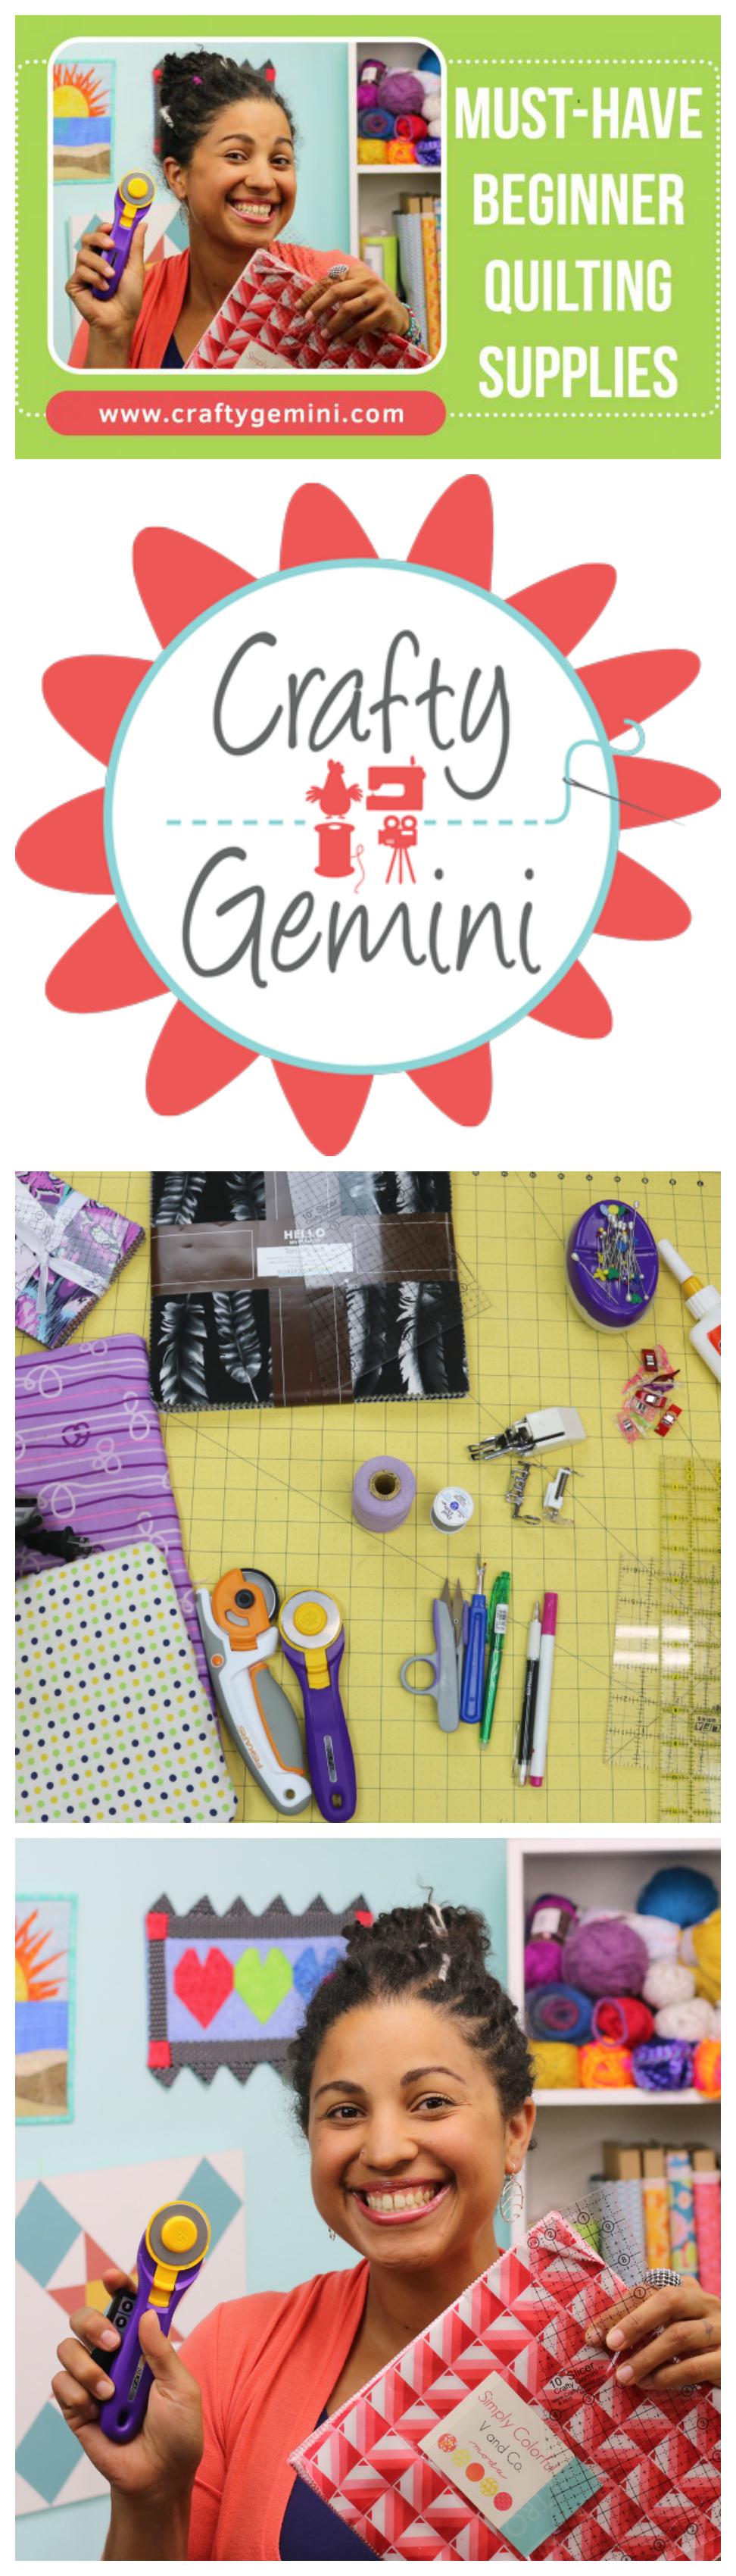 A great video that covers supplies beginner quilters will need!